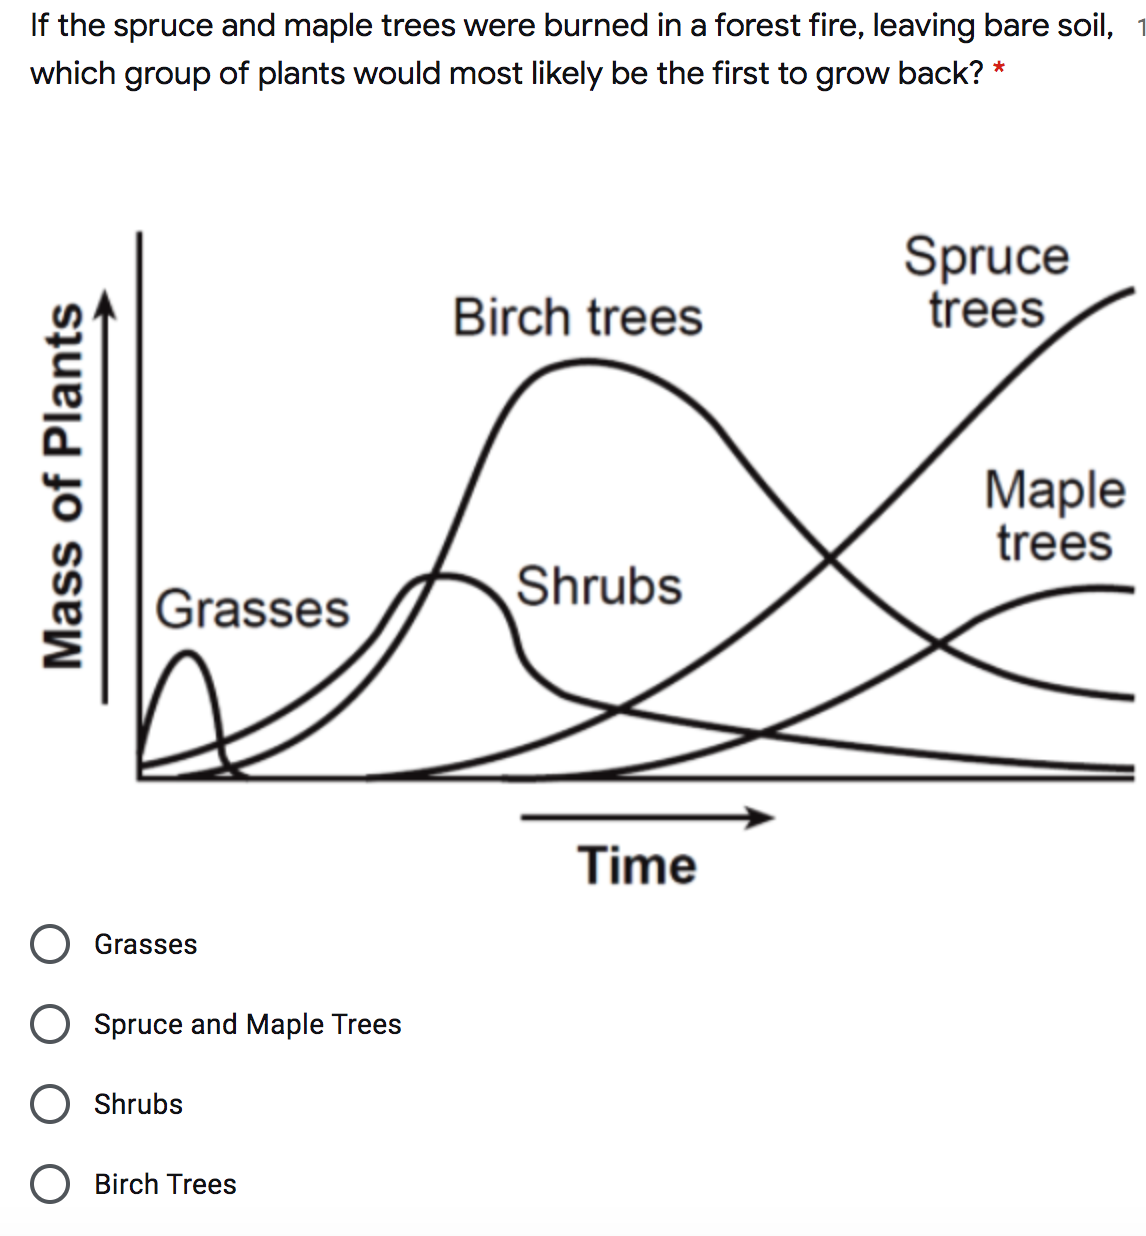 If the spruce and maple trees were burned in a forest fire, leaving bare soil,
which group of plants would most likely be the first to grow back? *
Spruce
trees
Birch trees
Мaple
trees
Grasses
Shrubs
Time
Grasses
Spruce and Maple Trees
Shrubs
Birch Trees
Mass of Plants
